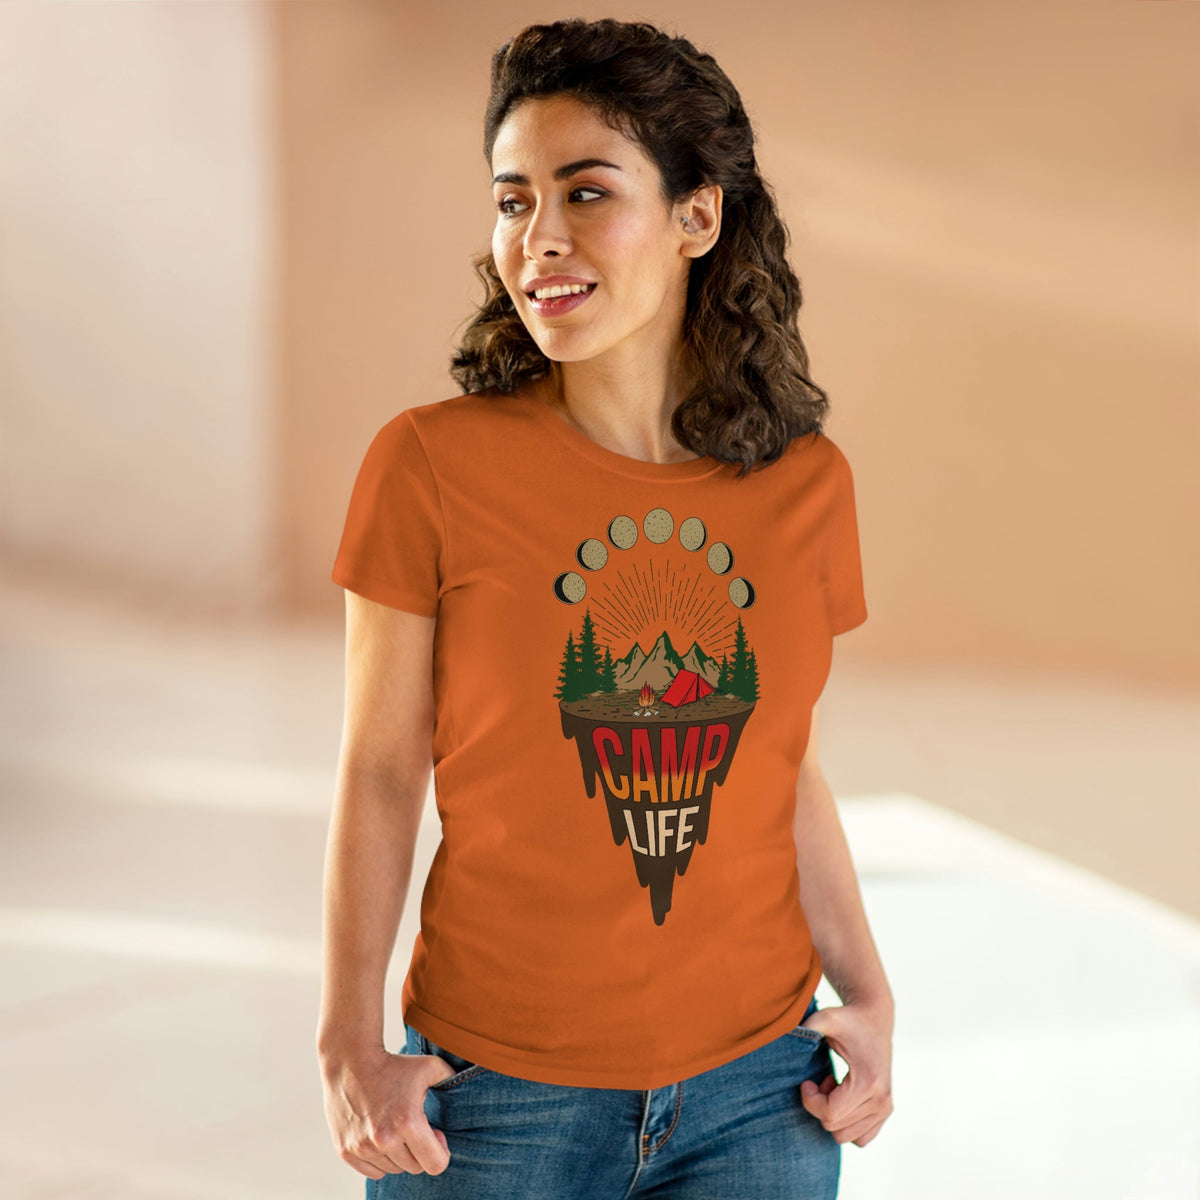 Camp Life Women's Midweight Cotton Tee - Salty Medic Clothing Co.